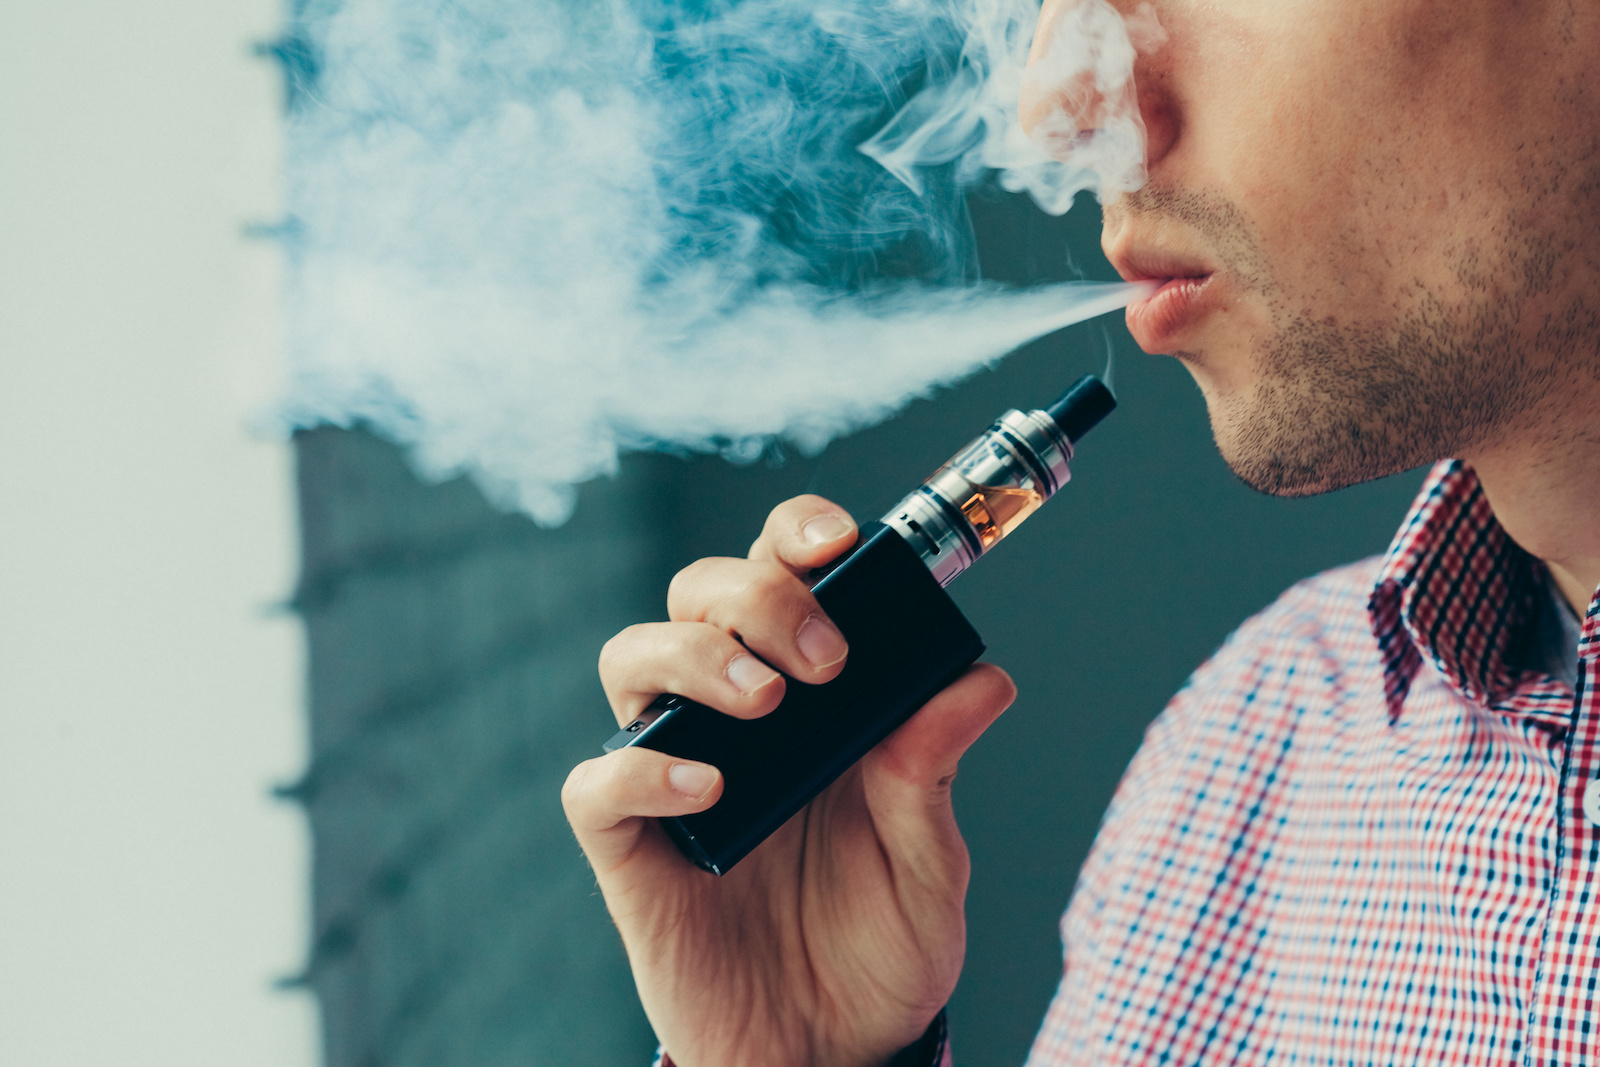 Nicotine-Free Vape: Is It Really That Much Better For You?